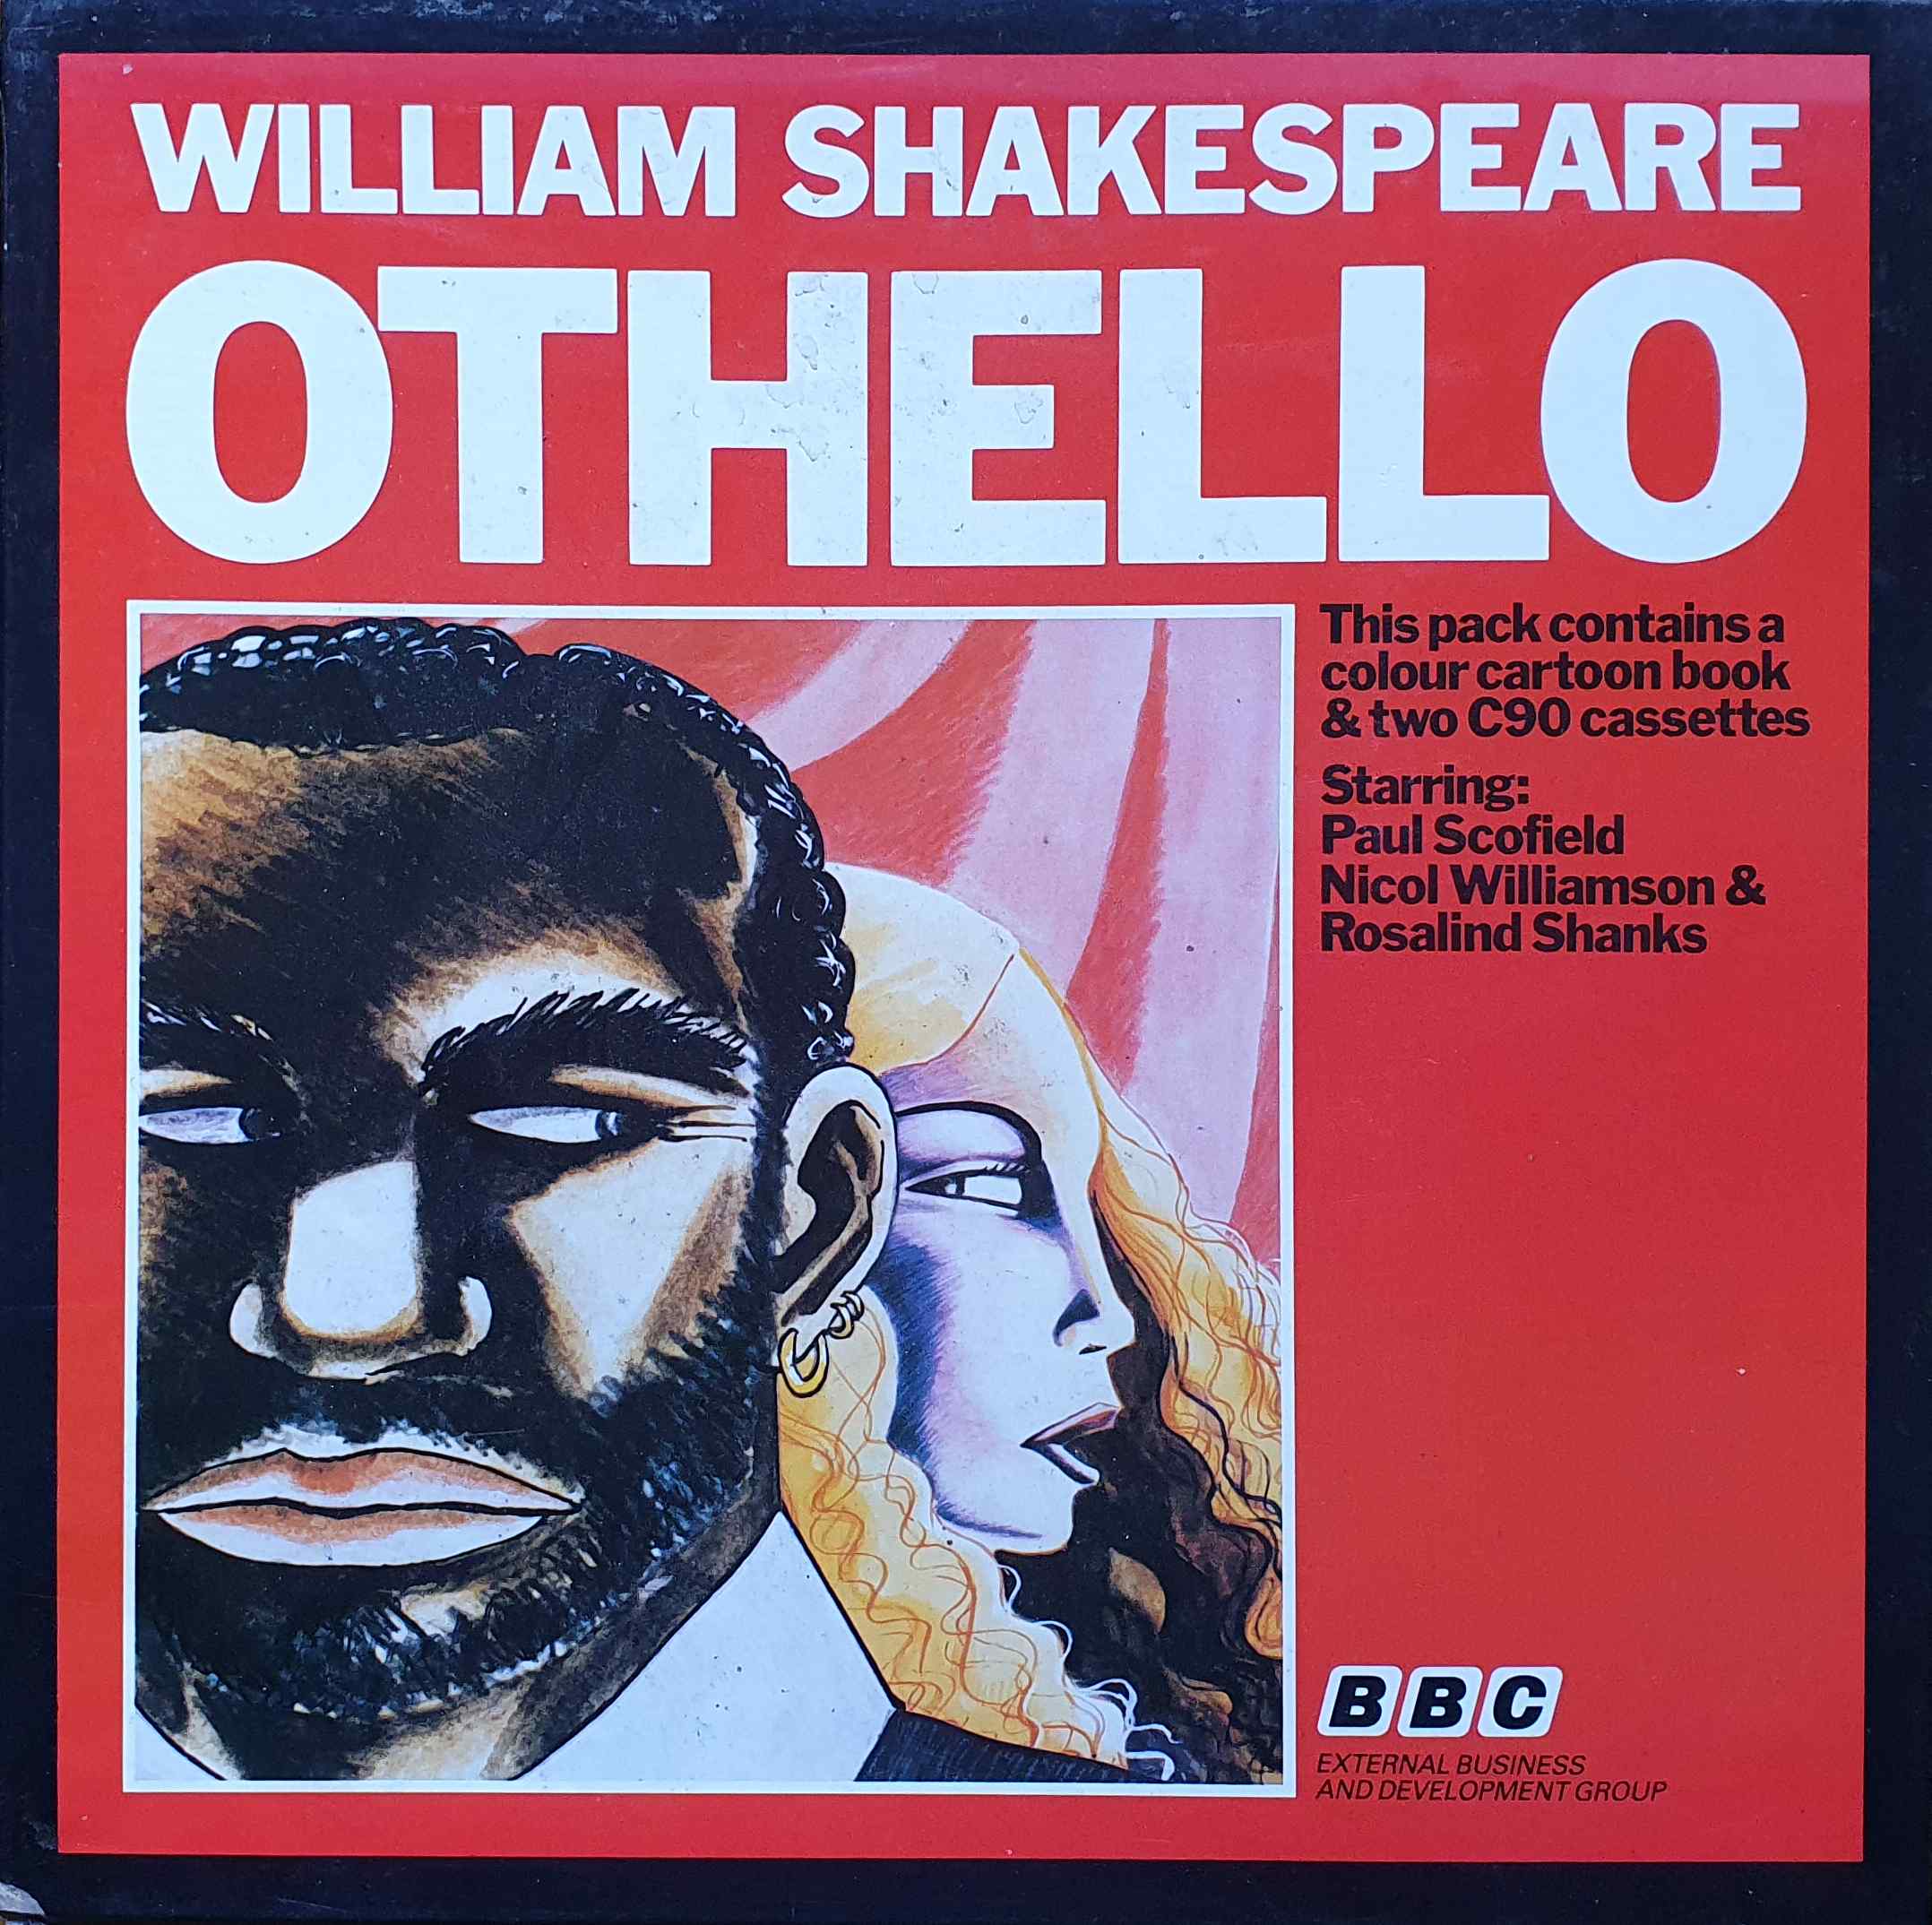 Picture of ISBN 0 946675 00 7 Othello by artist William Shakespeare from the BBC cassettes - Records and Tapes library